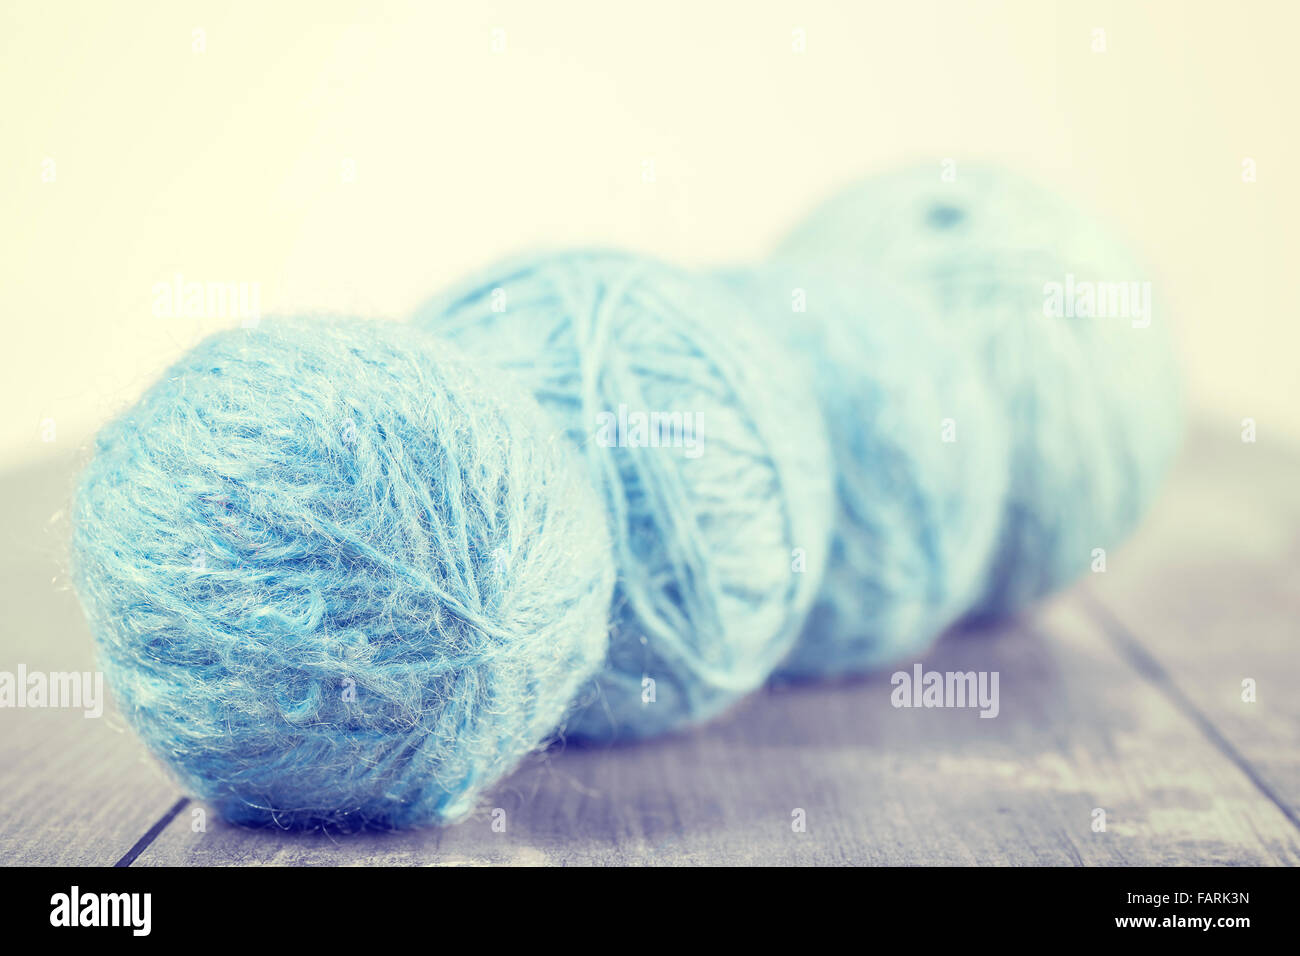 Vintage toned wool balls on a wooden background, shallow depth of field. Stock Photo